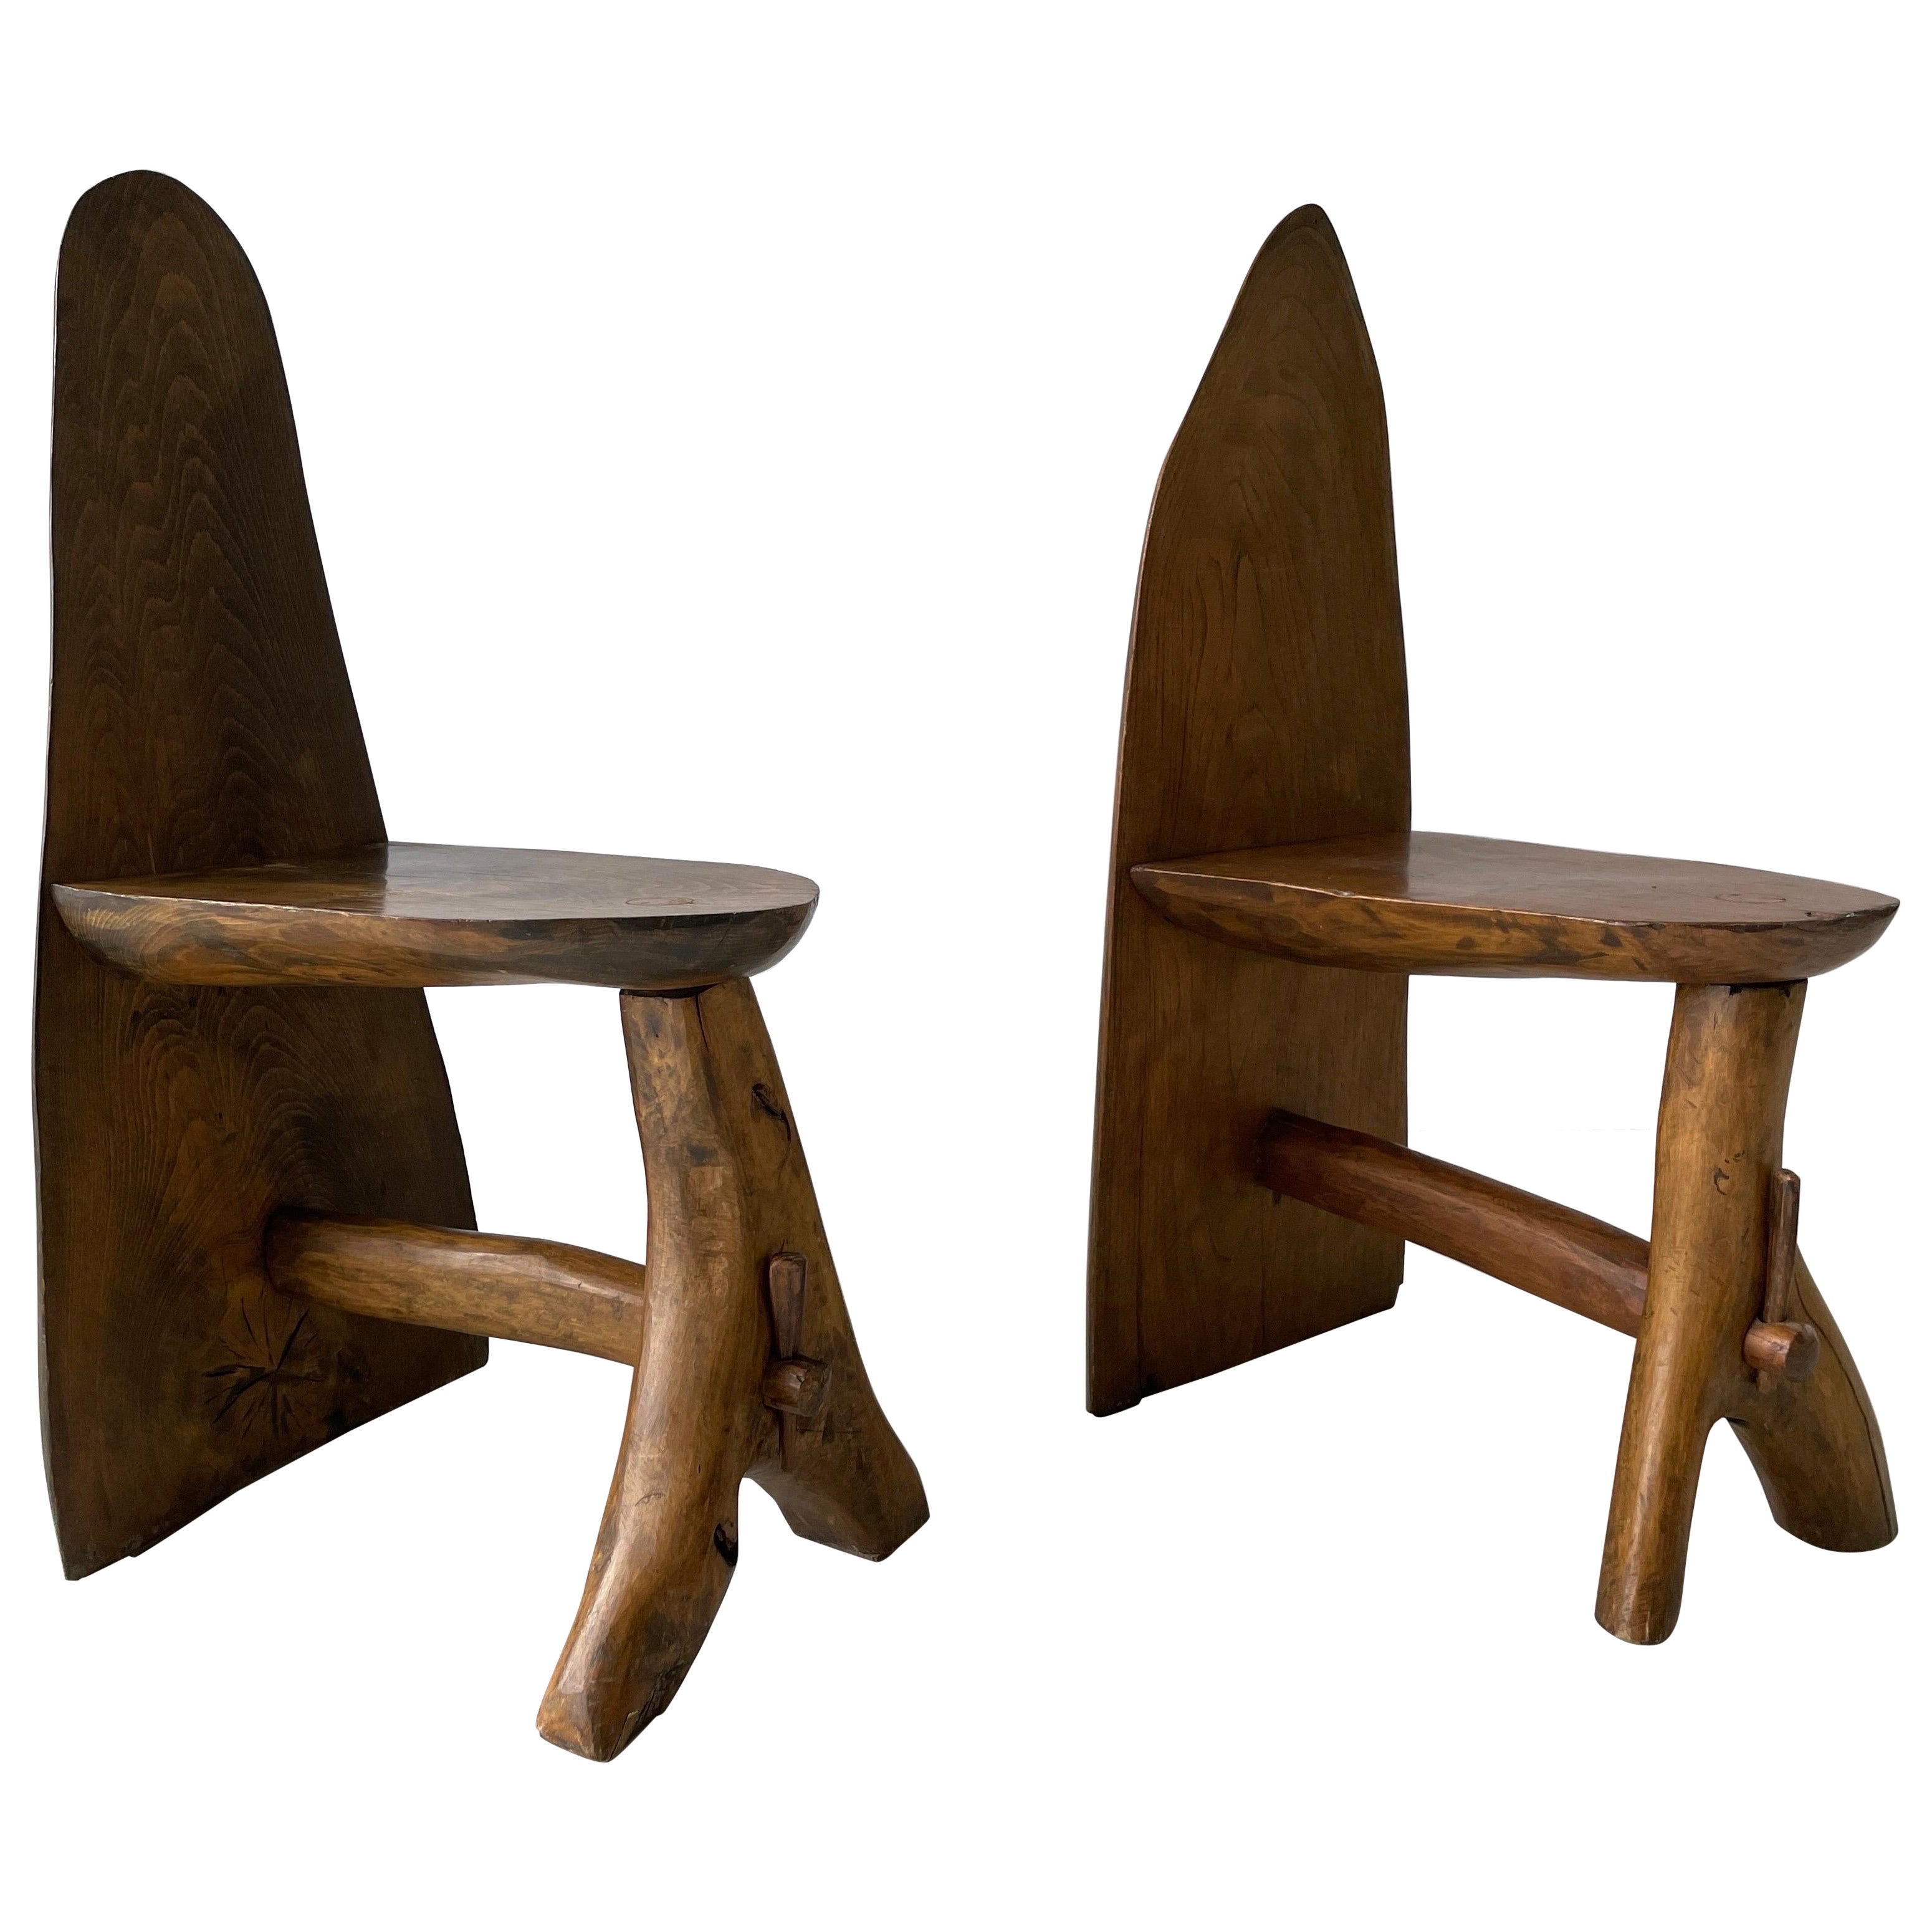 Hand-crafted Primitive Design Solid Wood Pair of Chairs, 1950s, Italy For Sale